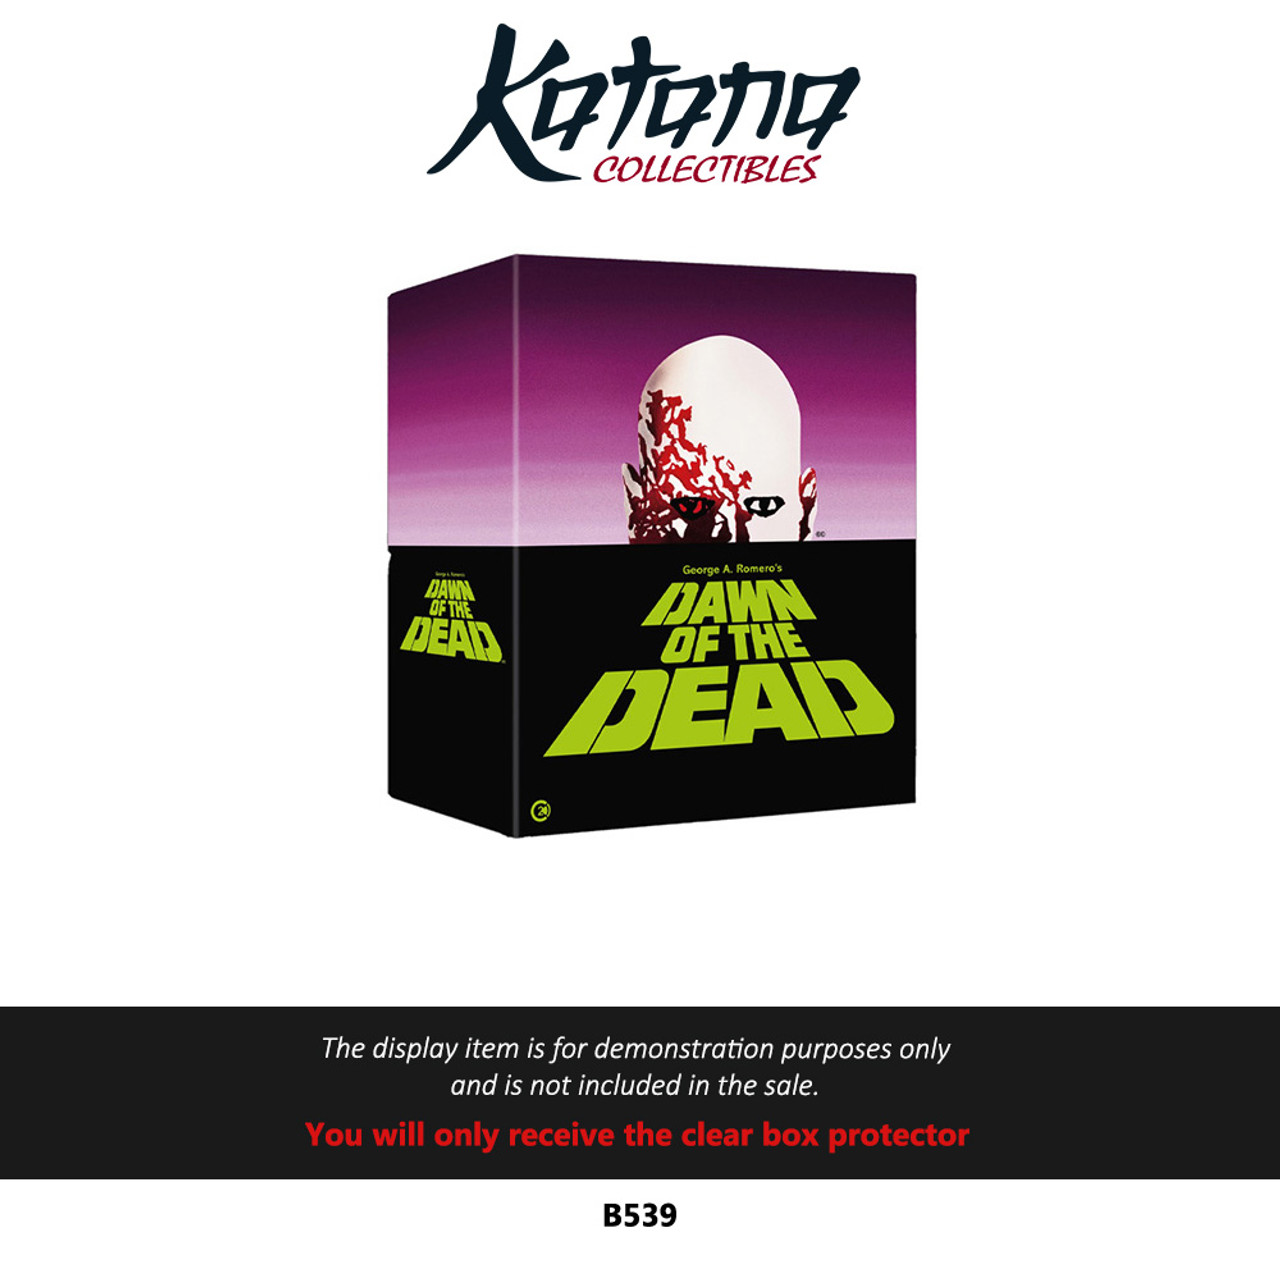 Katana Collectibles Protector For Second Sight - Dawn of the Dead Limited Edition